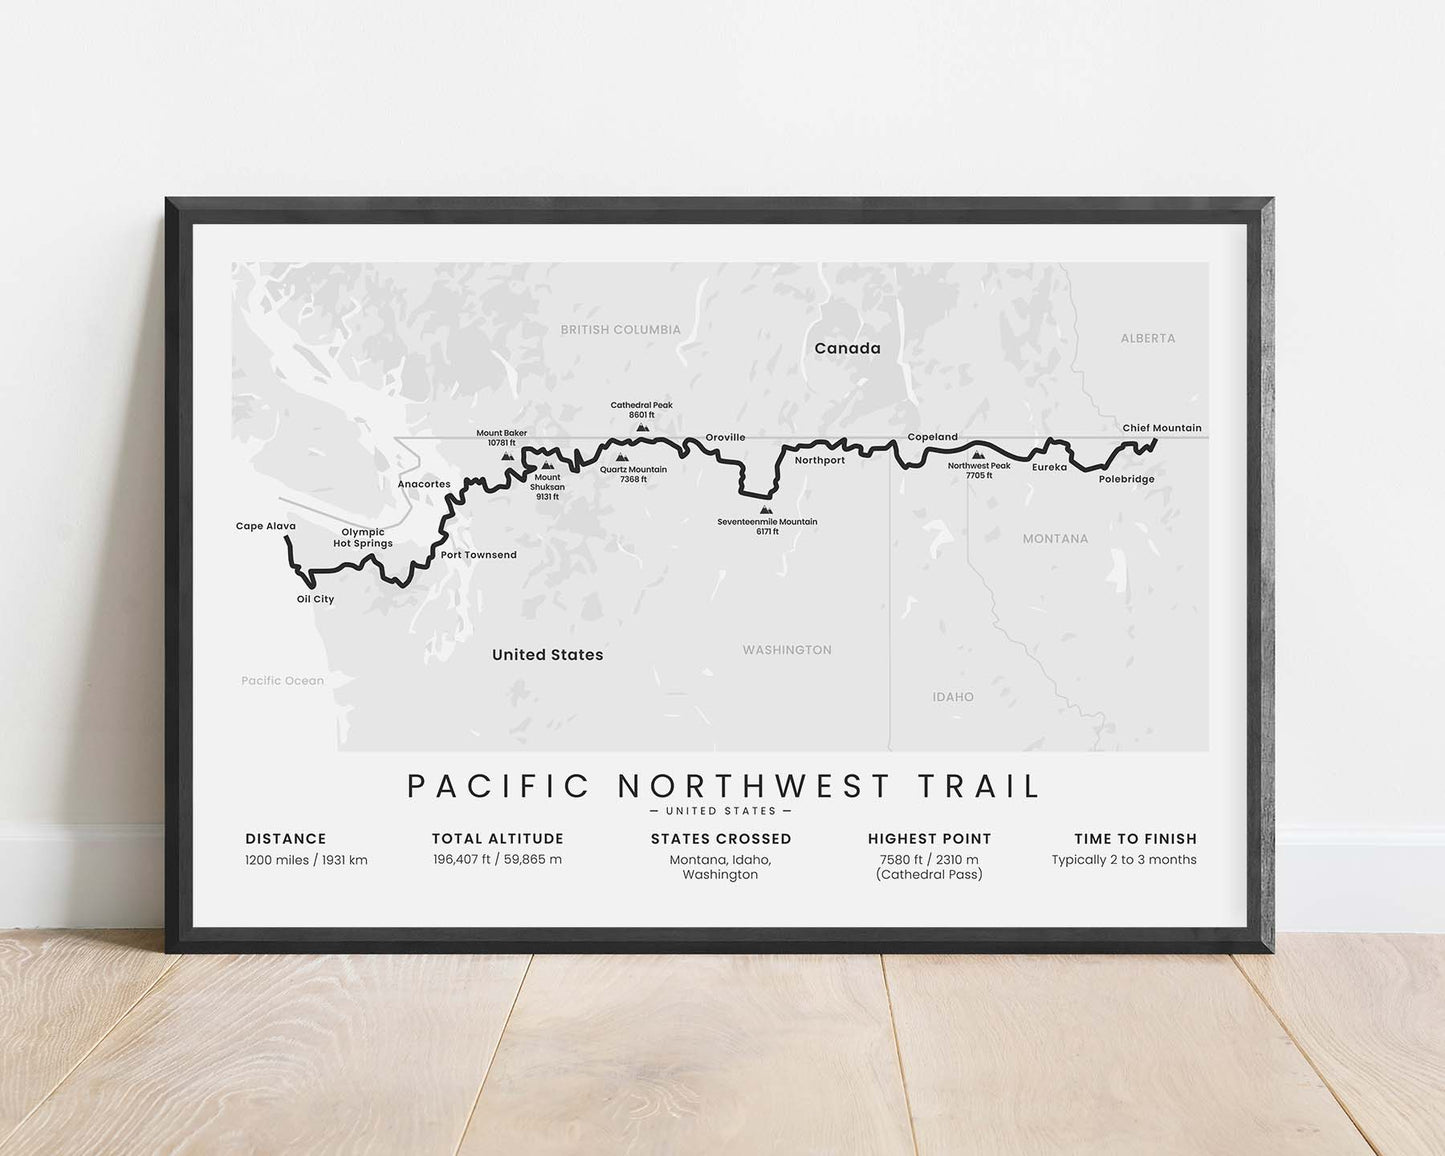 Pacific Northwest Trail (Washington) Hike Poster with White Background